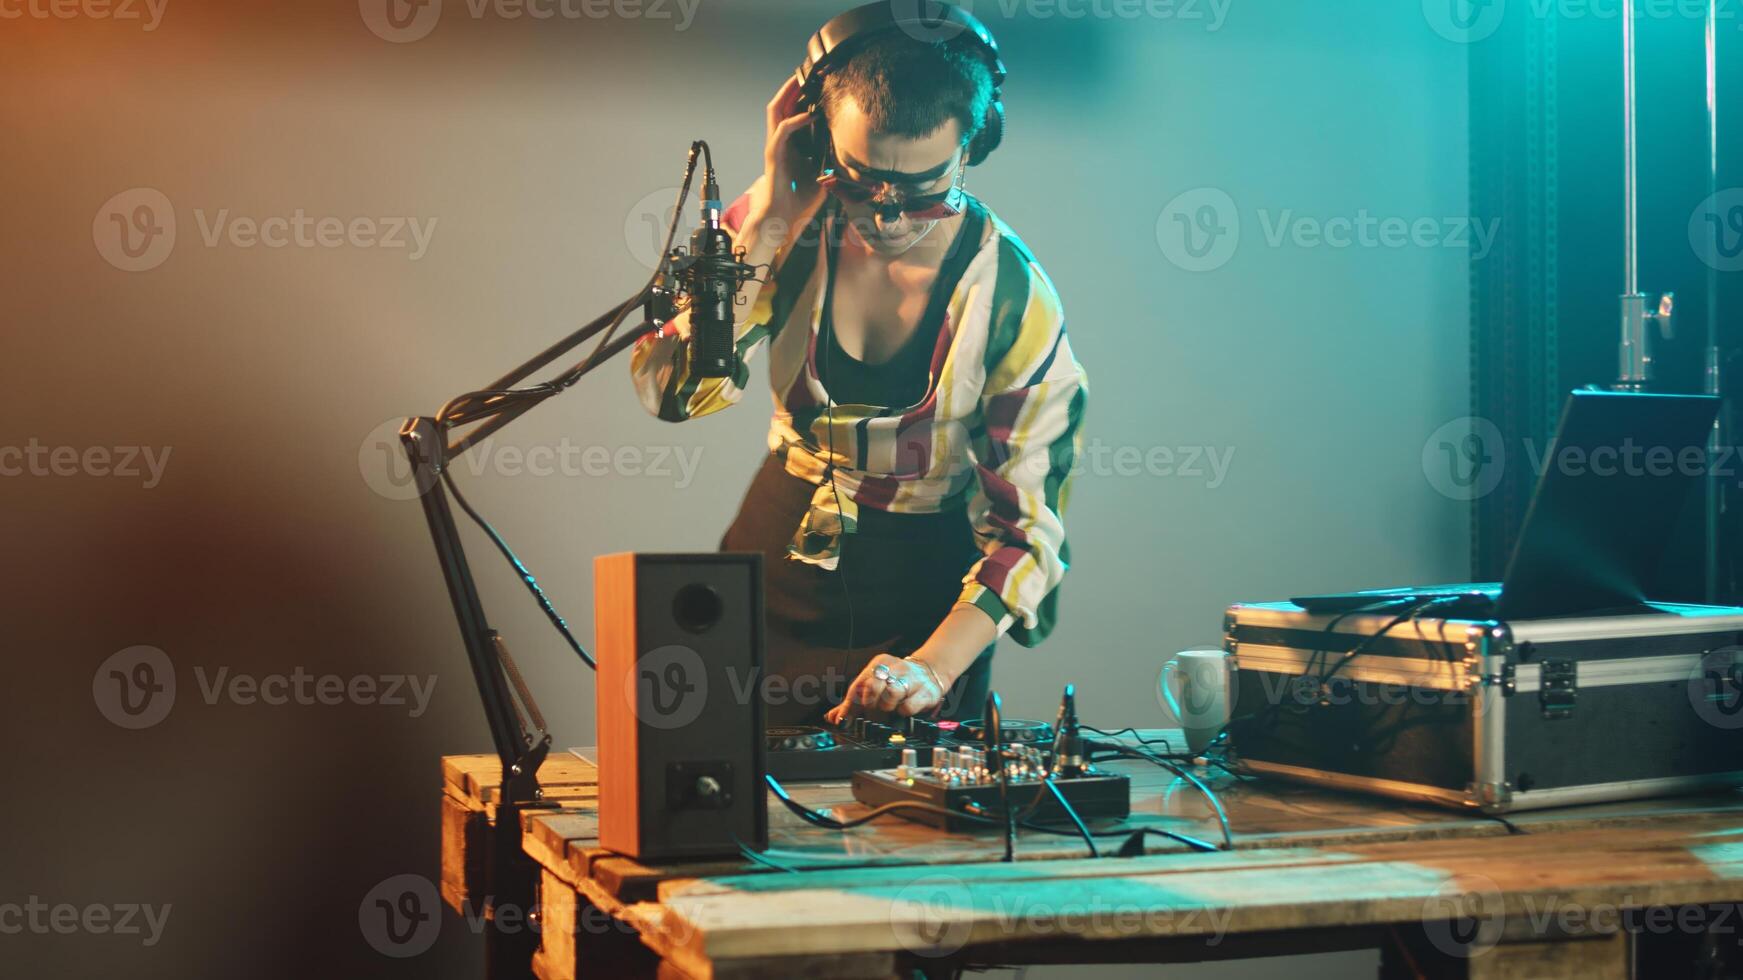 Female performer using mixing turntables and buttons to play remixed songs at party, having fun with audio dj board for techno nightclub. Playing bass sounds with electronics. Handheld shot. photo